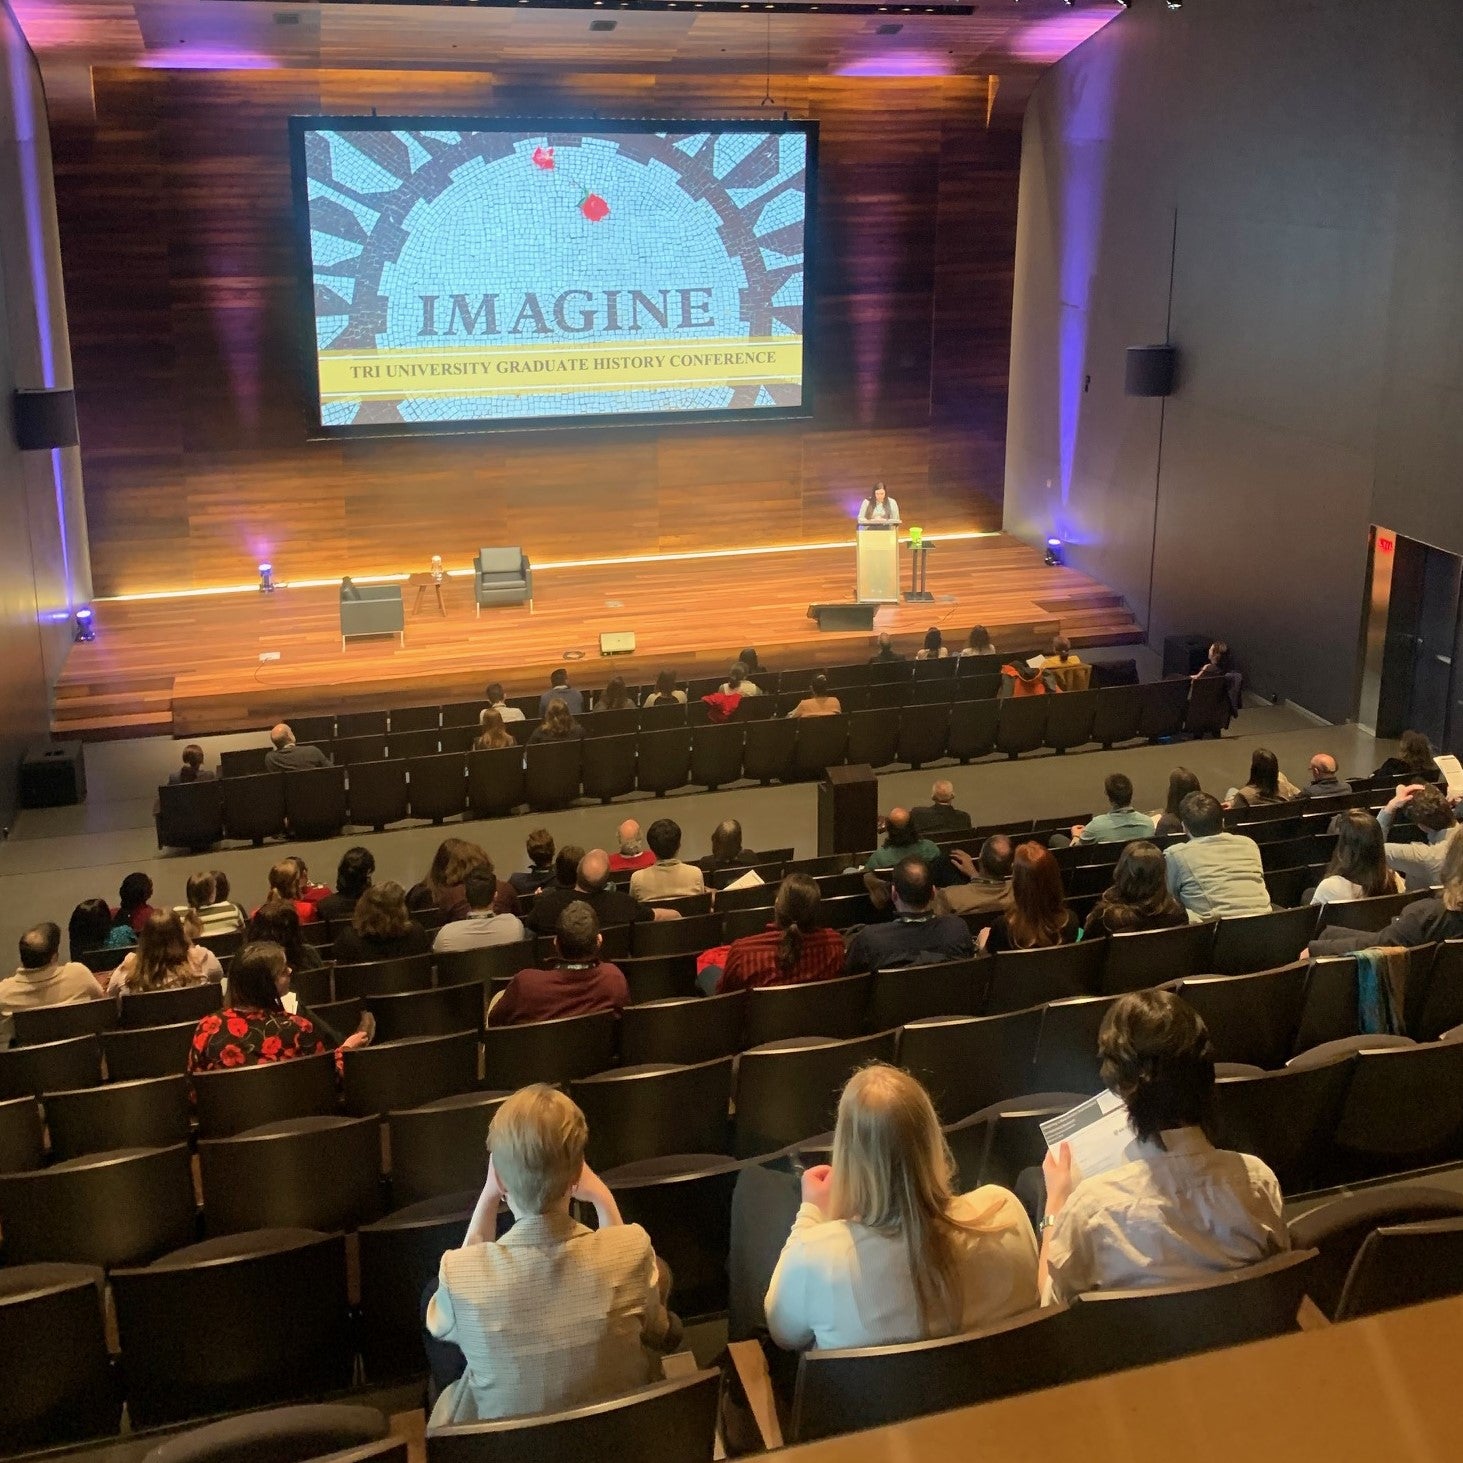 View of conference stage with "Imagine" on screen and backs of audience members